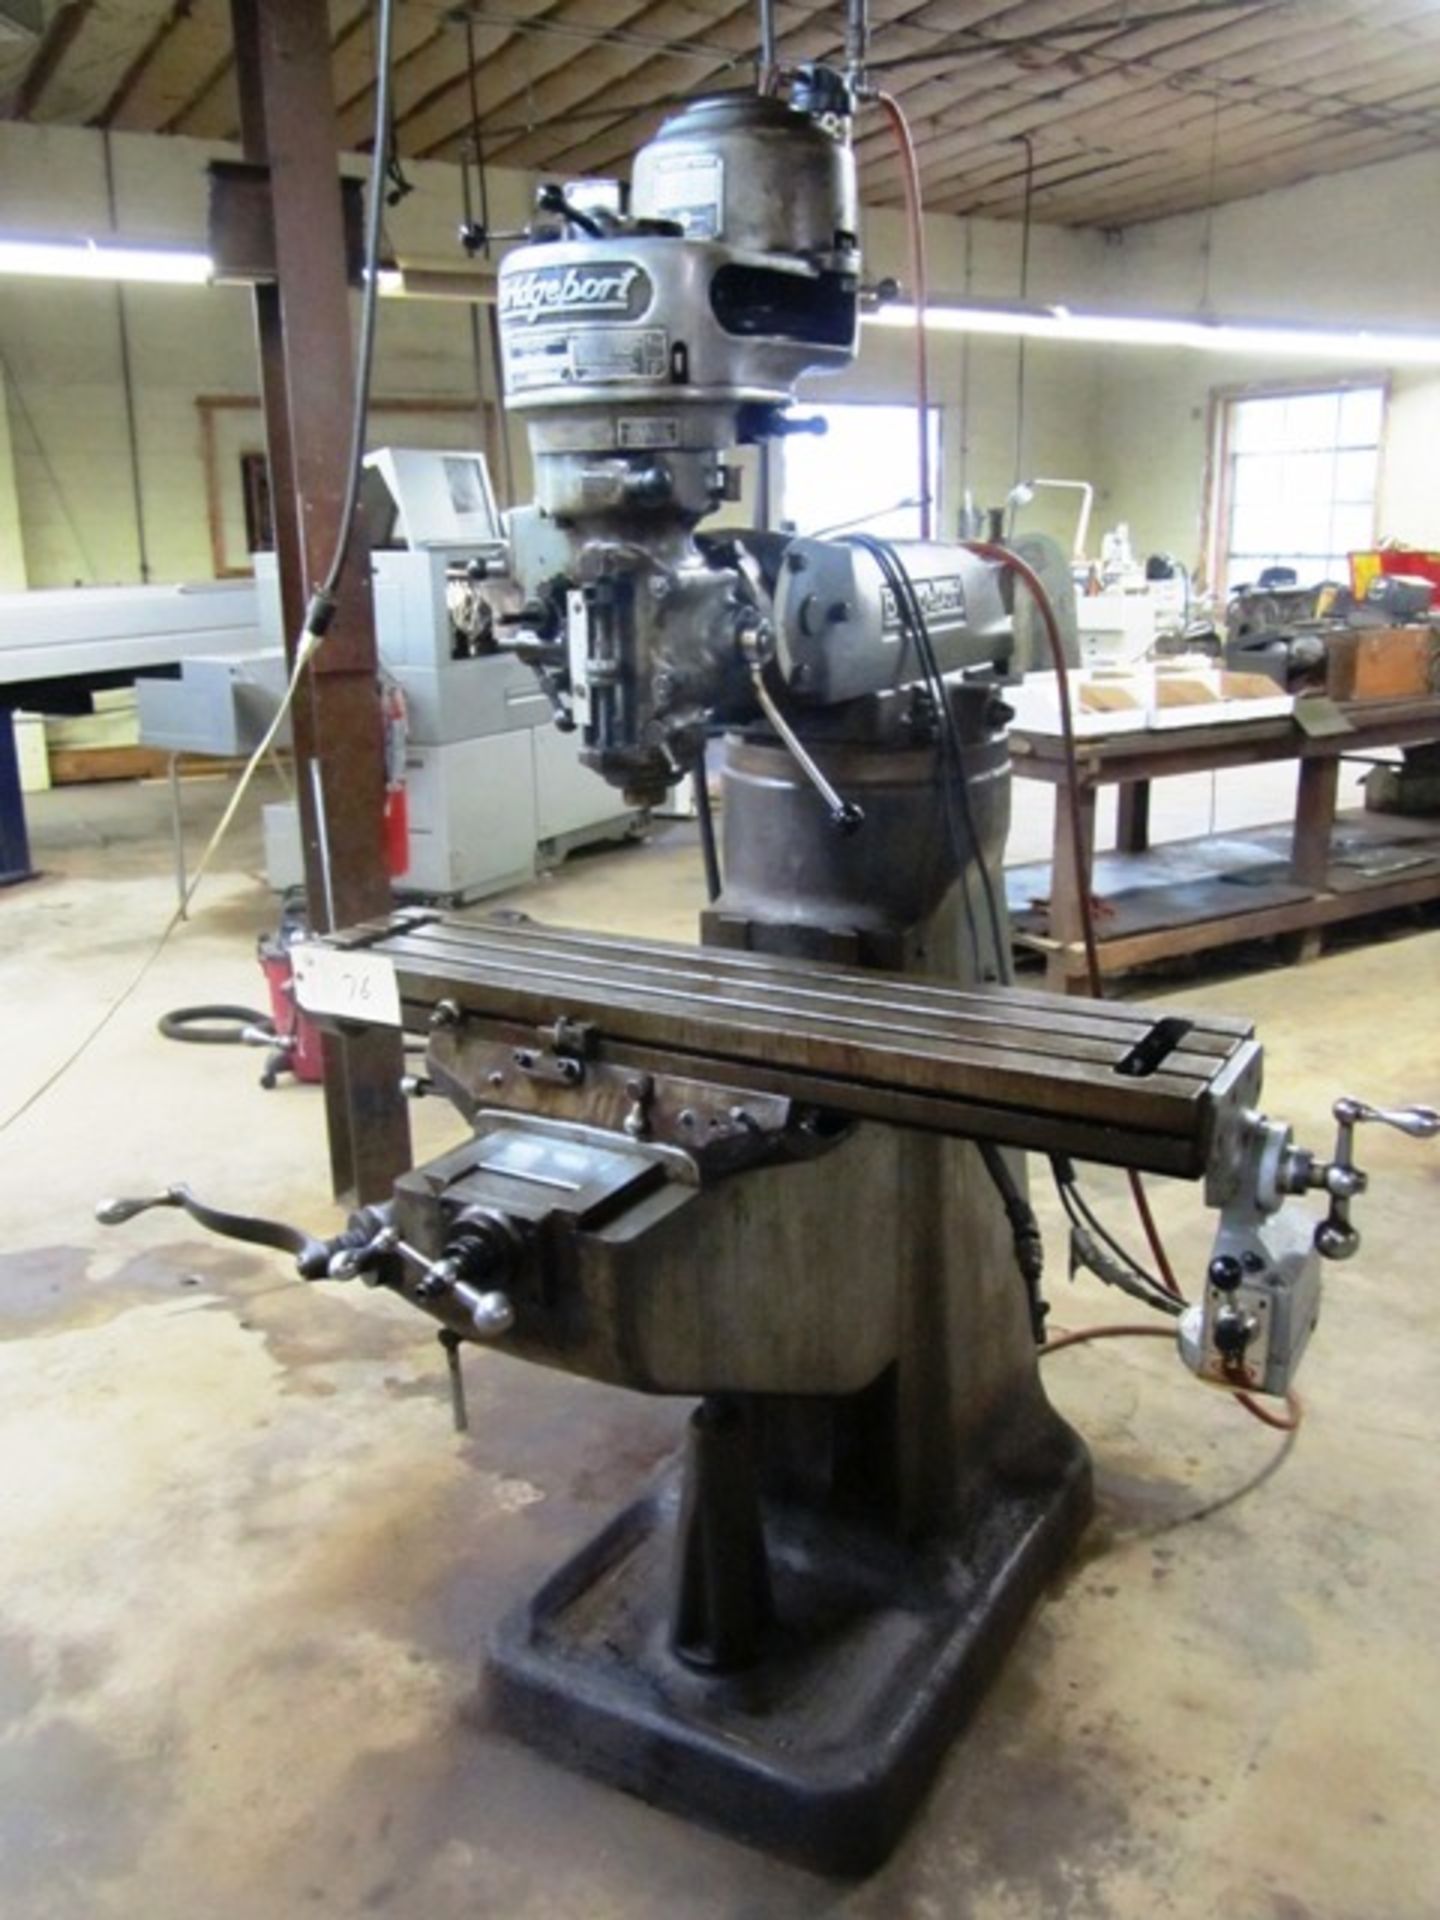 Bridgeport 1 HP Vertical Milling Machine with 9'' x 42'' Power Feed Table, Spindle Speeds to 2,720